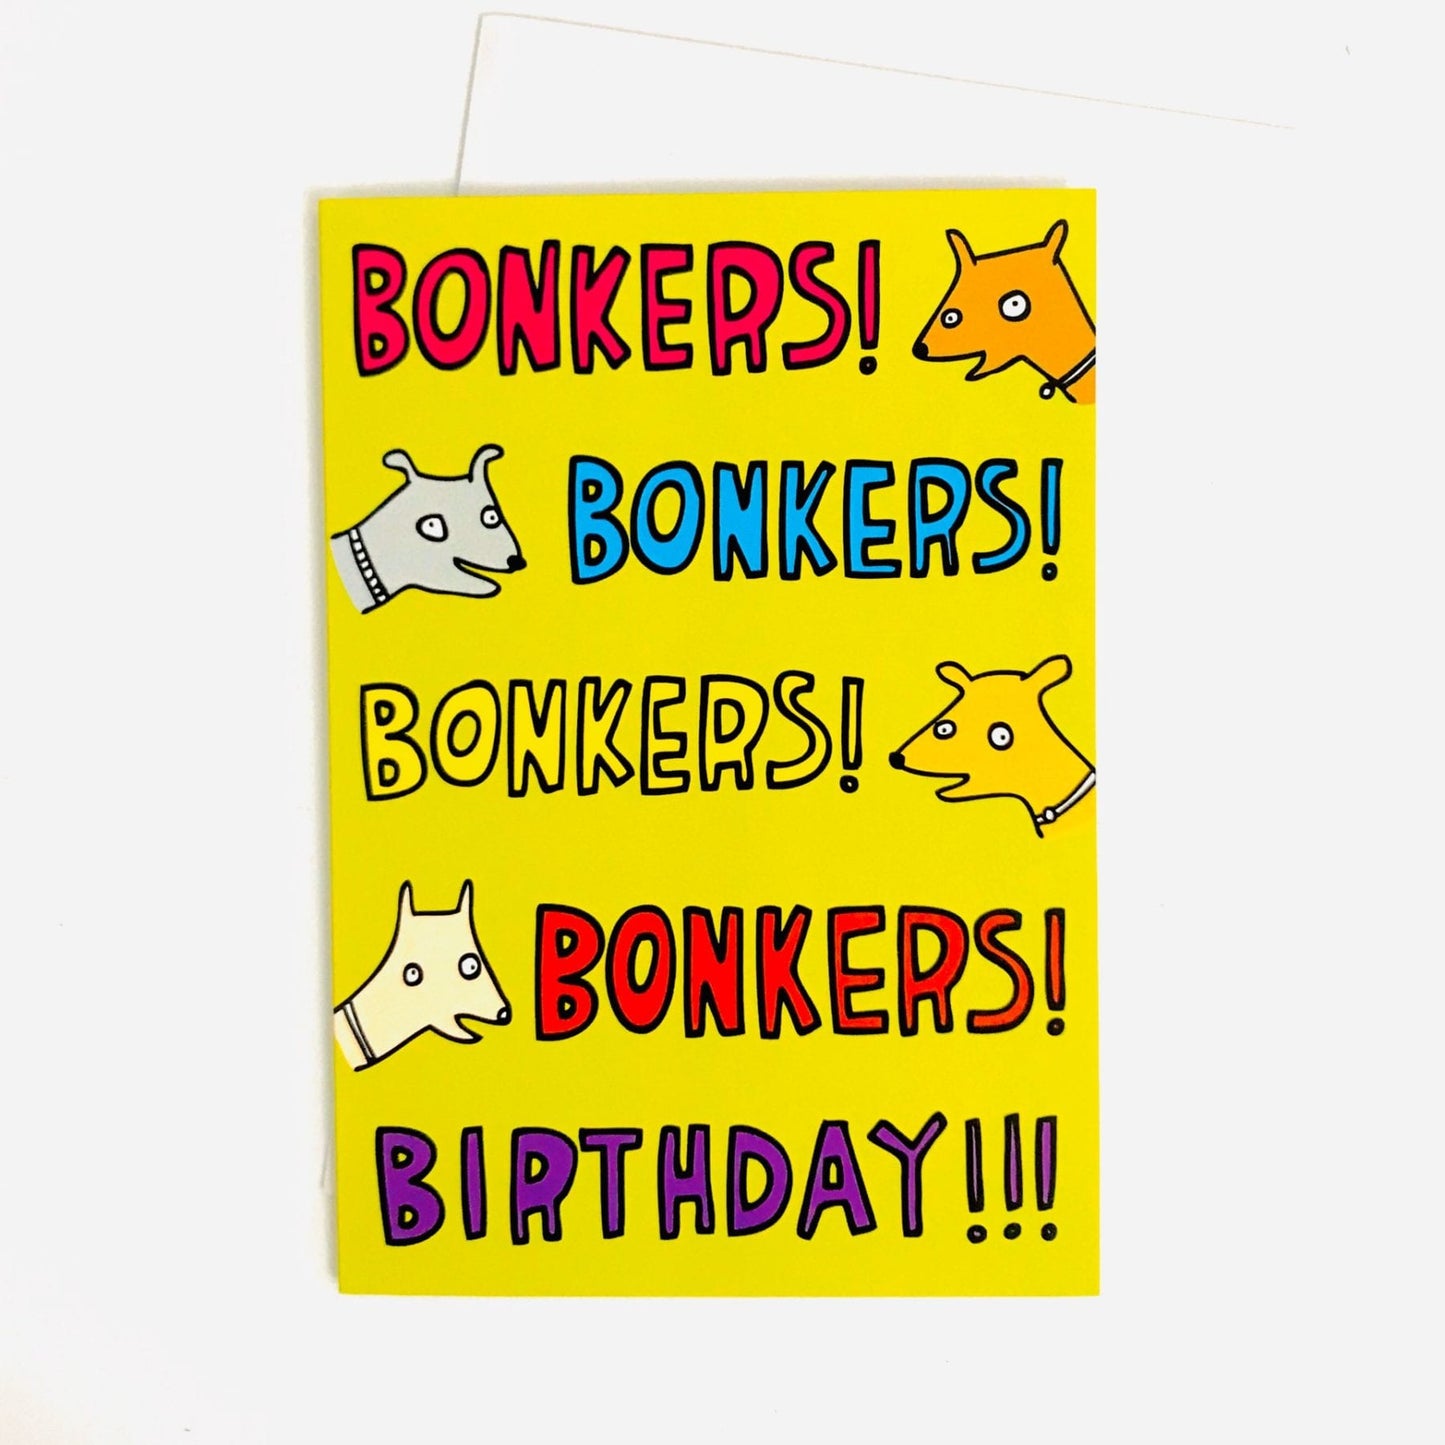 Able and Game Card Bonkers! Bonkers! Bonkers! Birthday!!!